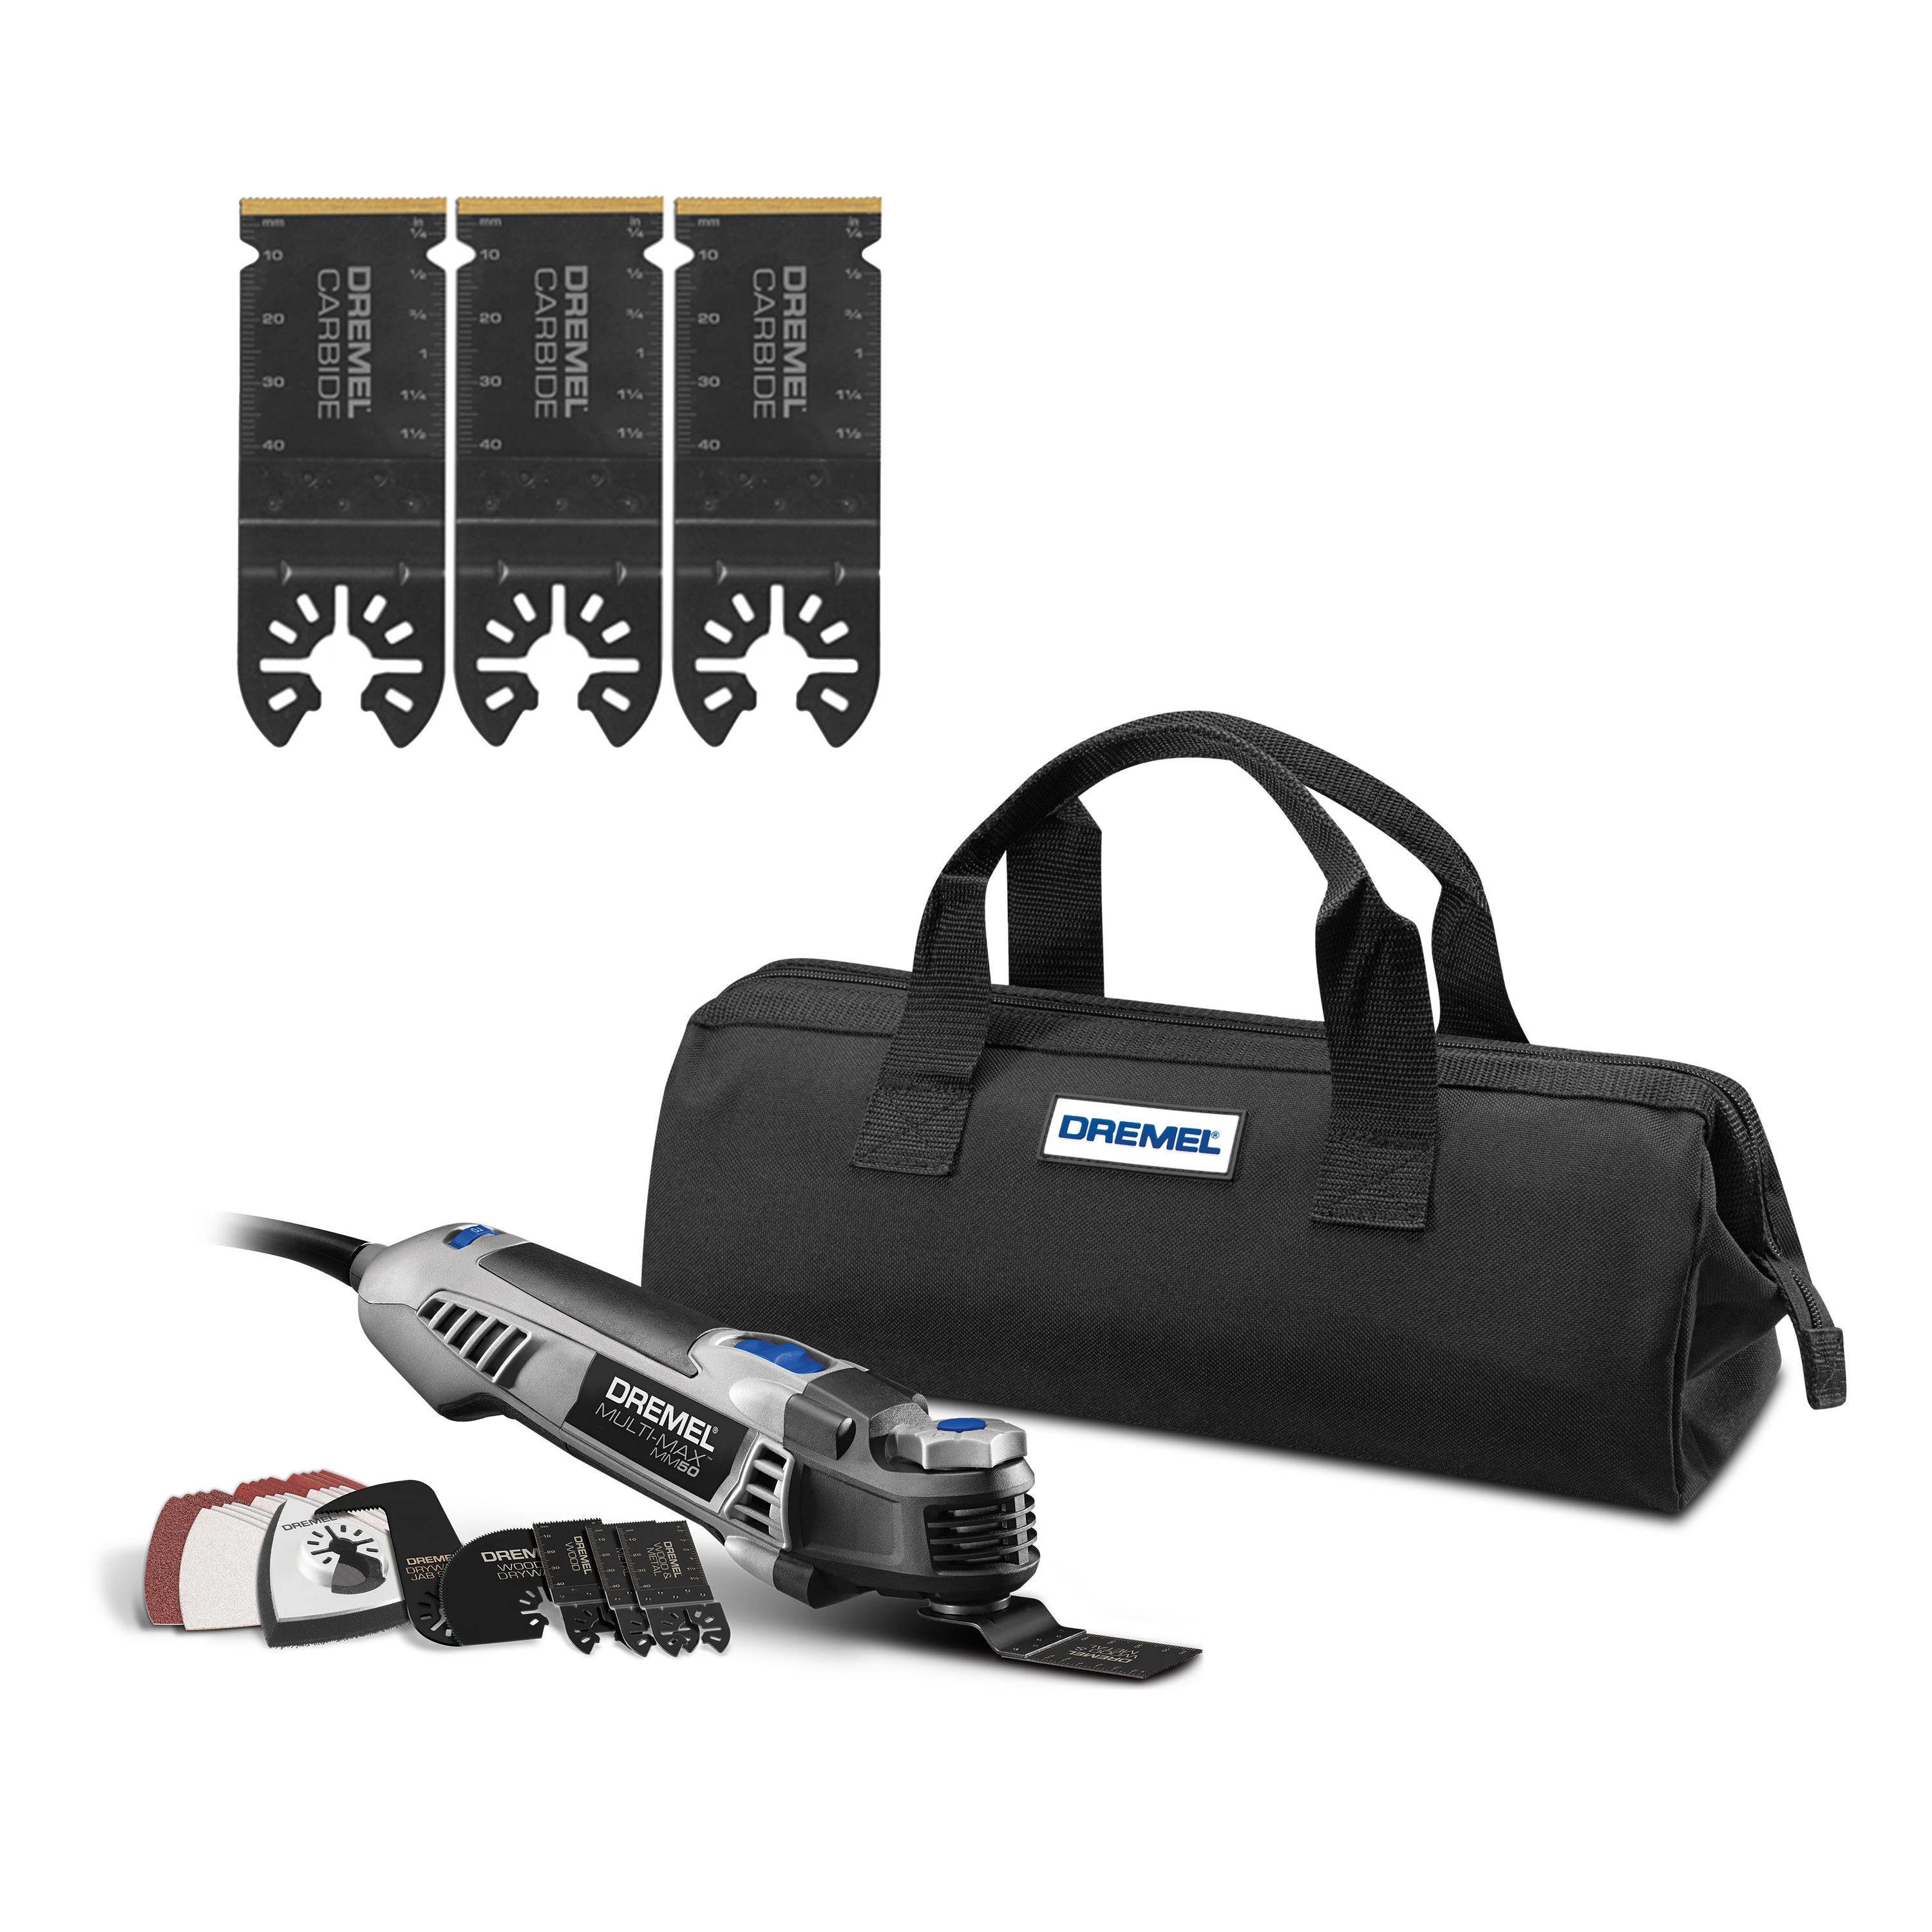 Dremel Multi-Max Corded 5 Amp Variable Speed Oscillating Multi-Tool Kit with 30 Accessories + 3-Pack Carbide Blades